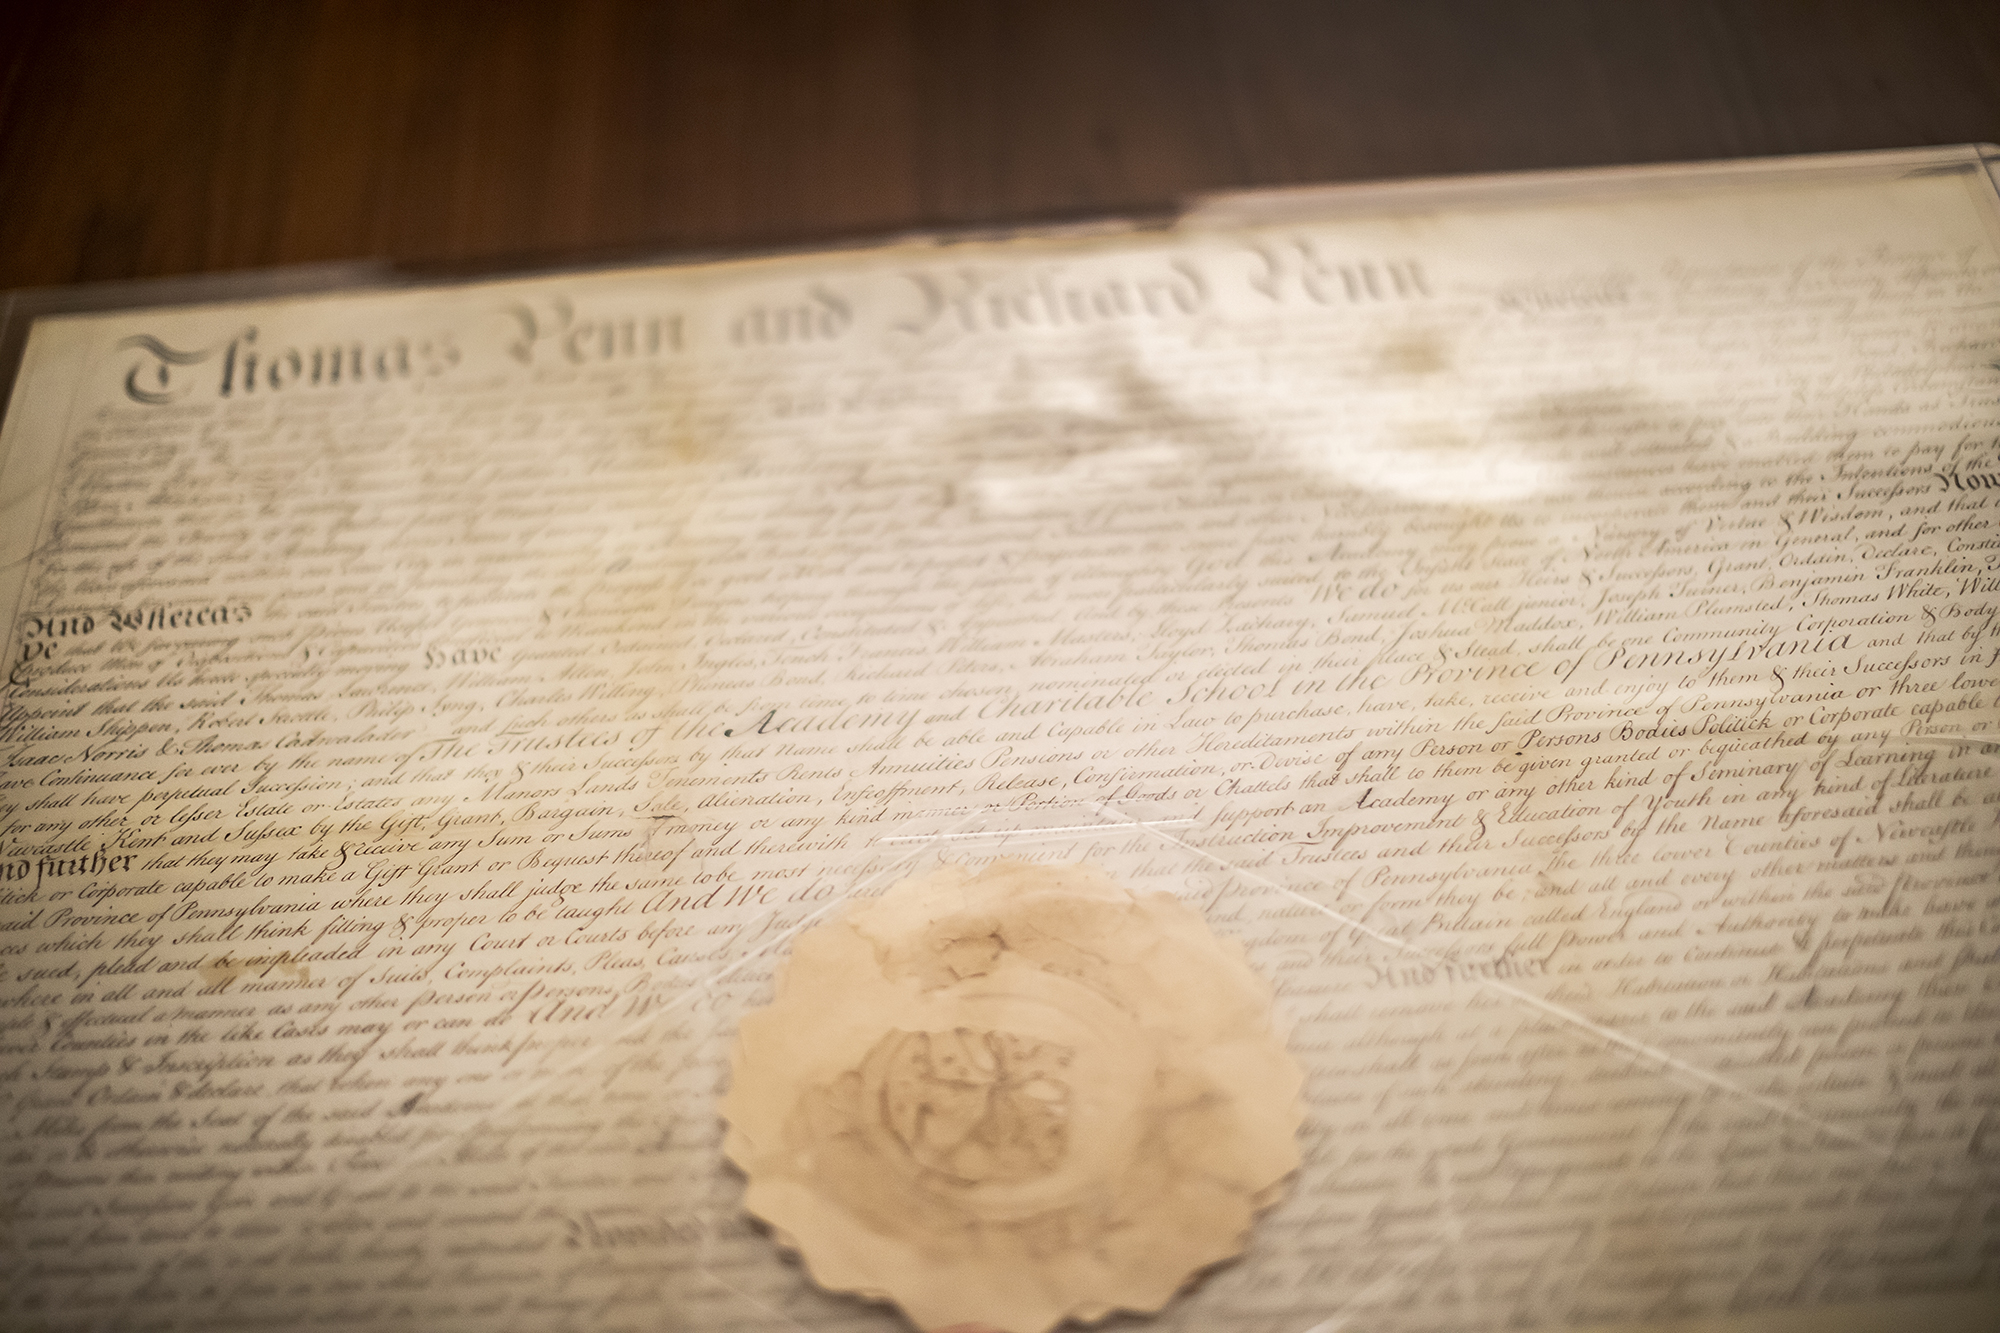 An antique paper and seal from Penn Archives.